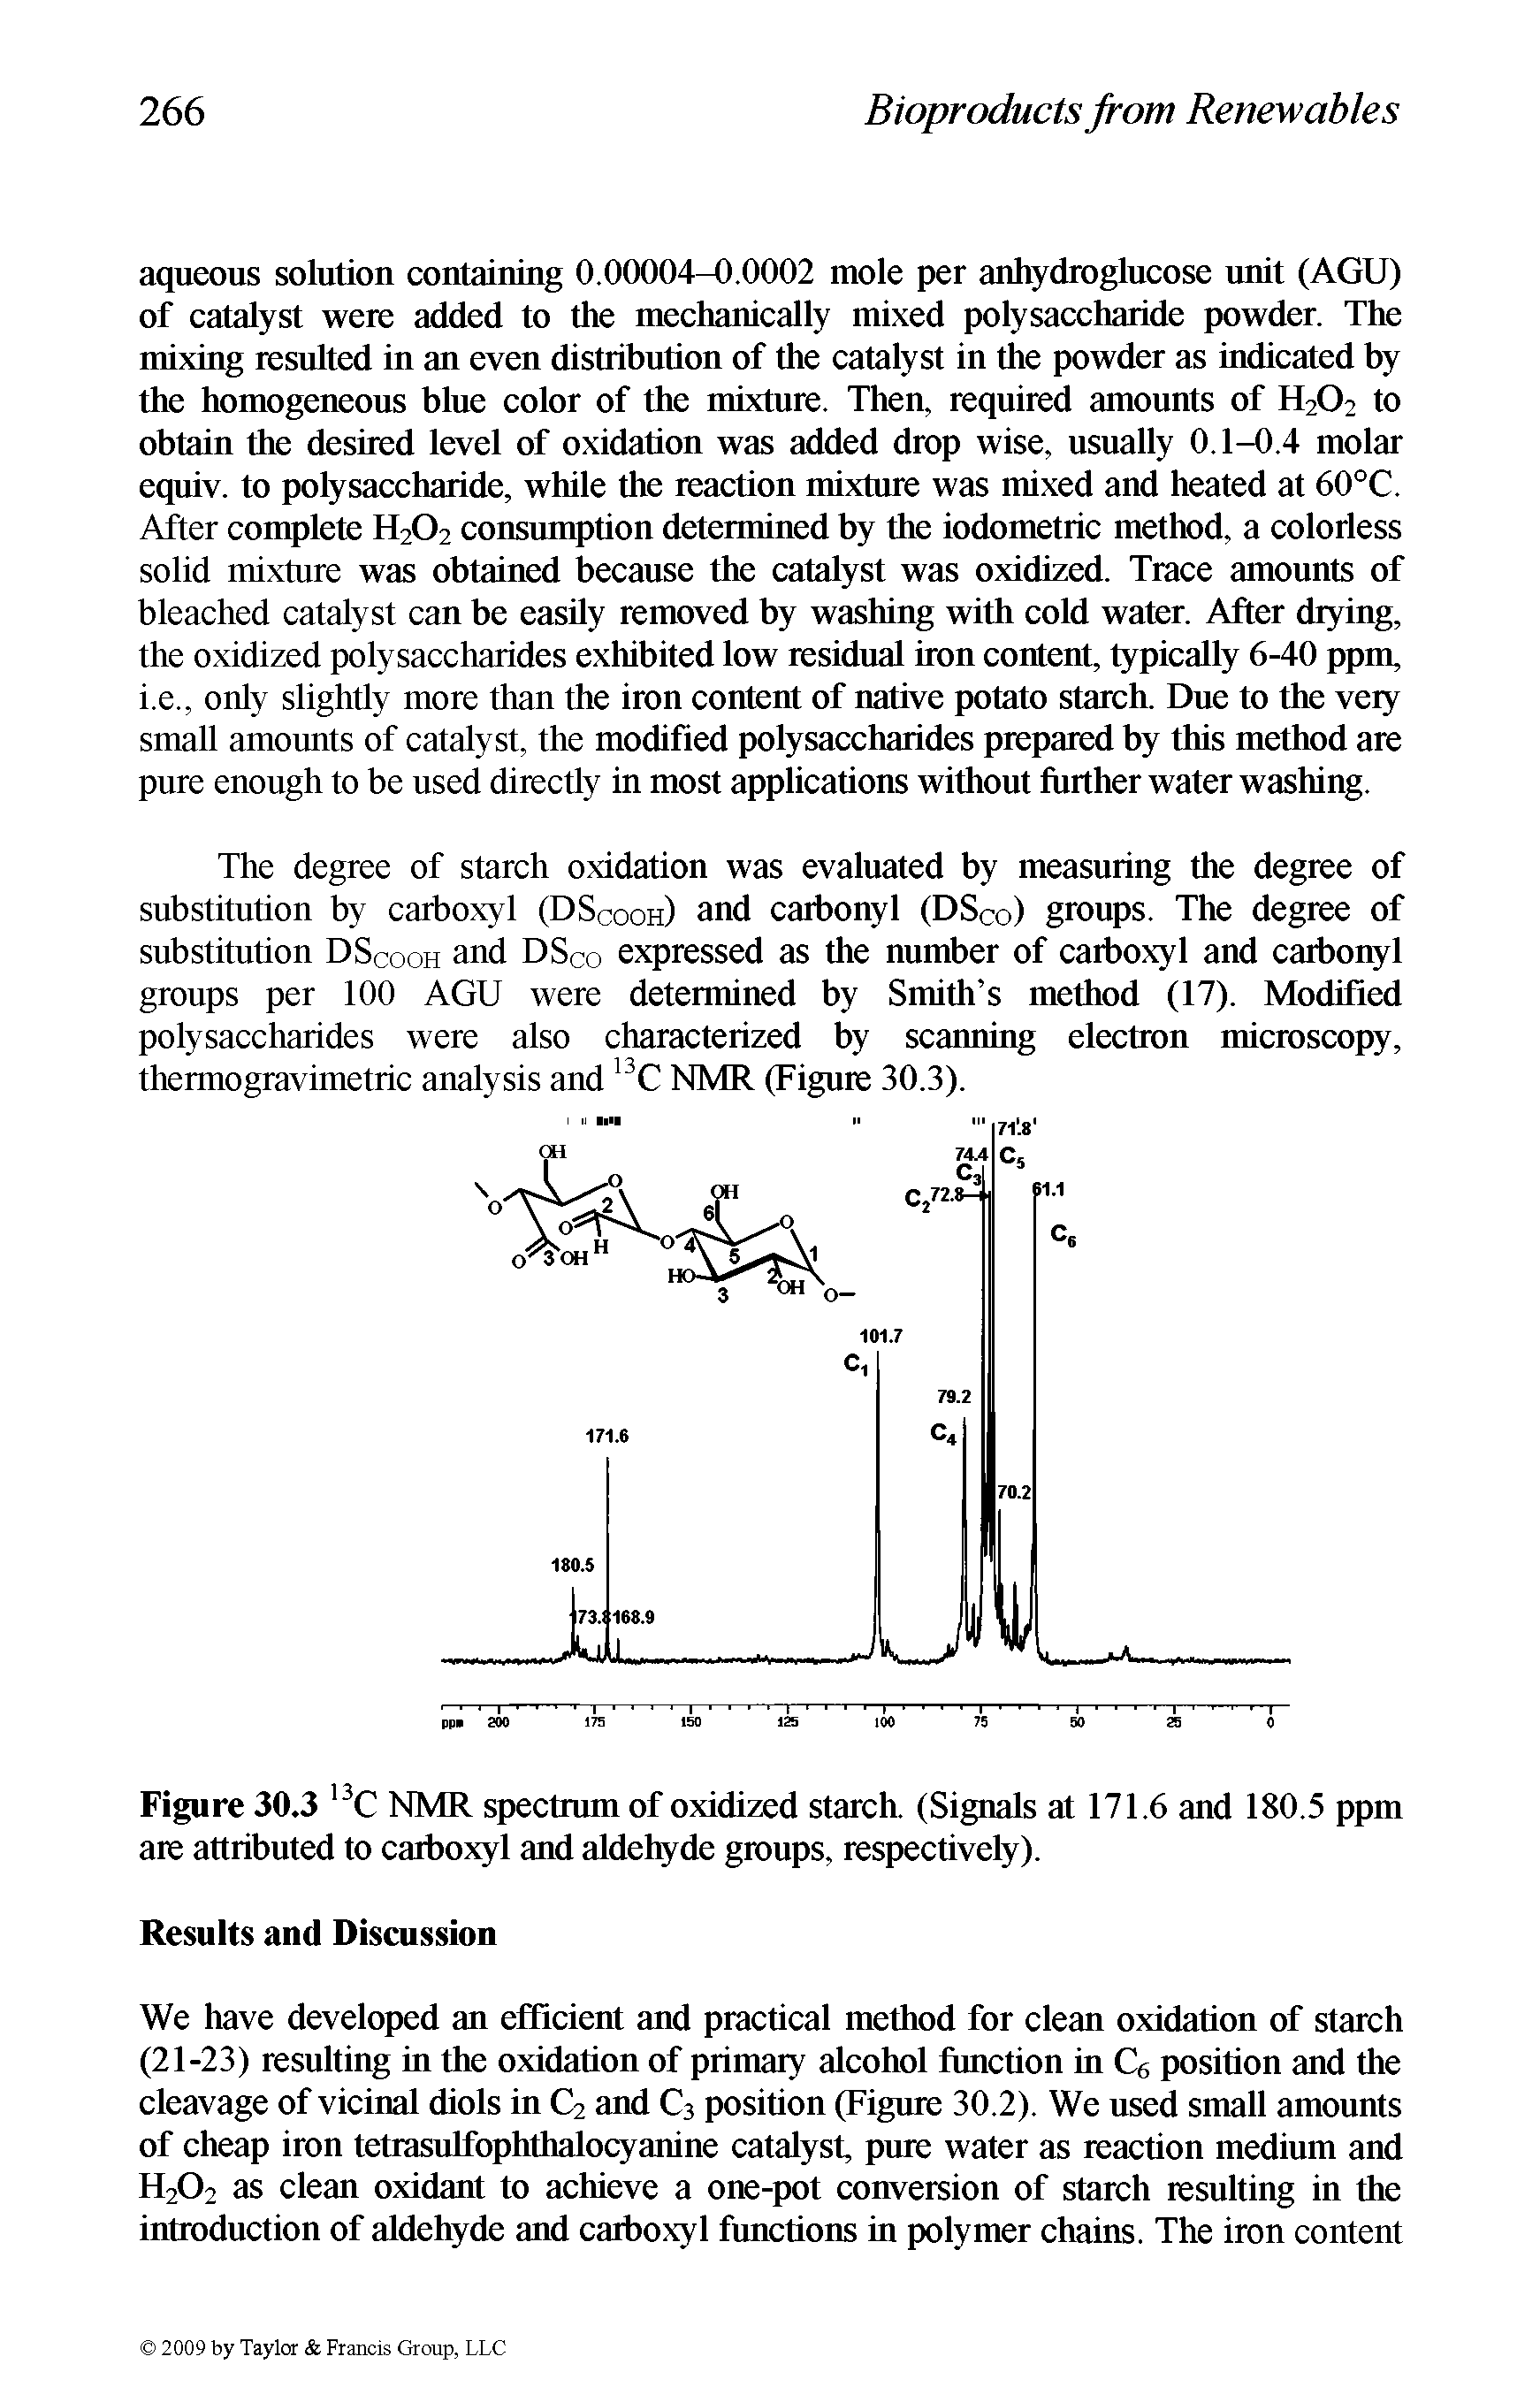 Figure 30.3 C NMR spectrum of oxidized starch. (Signals at 171.6 and 180.5 ppm are attributed to carboxyl and aldehyde groups, respectively).